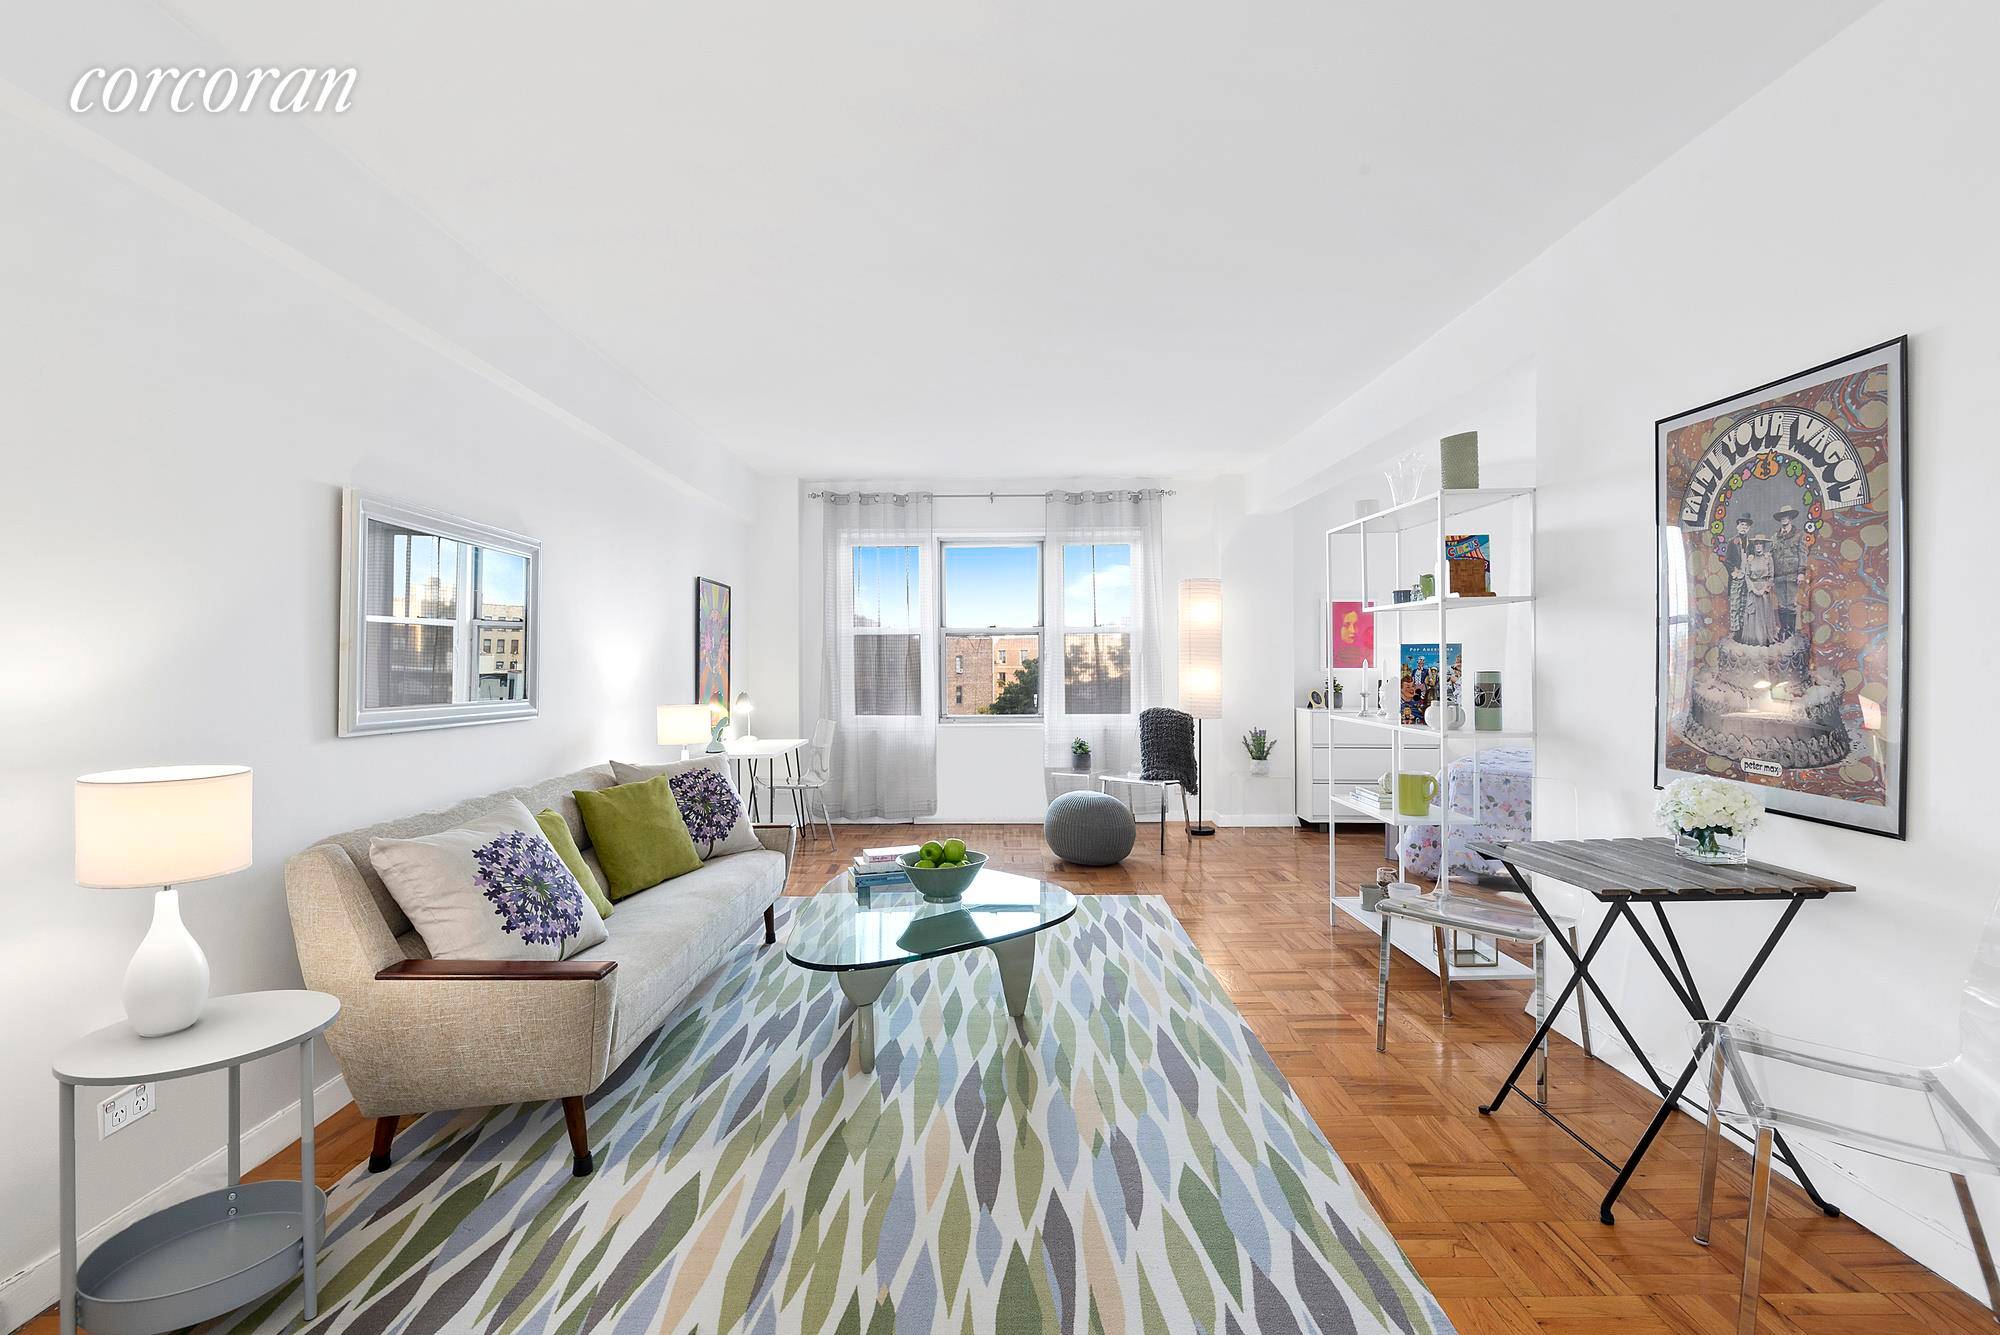 Enviously situated in the hub of Grand Army Plaza, this expansive and serene L shaped studio awaits you with the utmost in location and amenities.